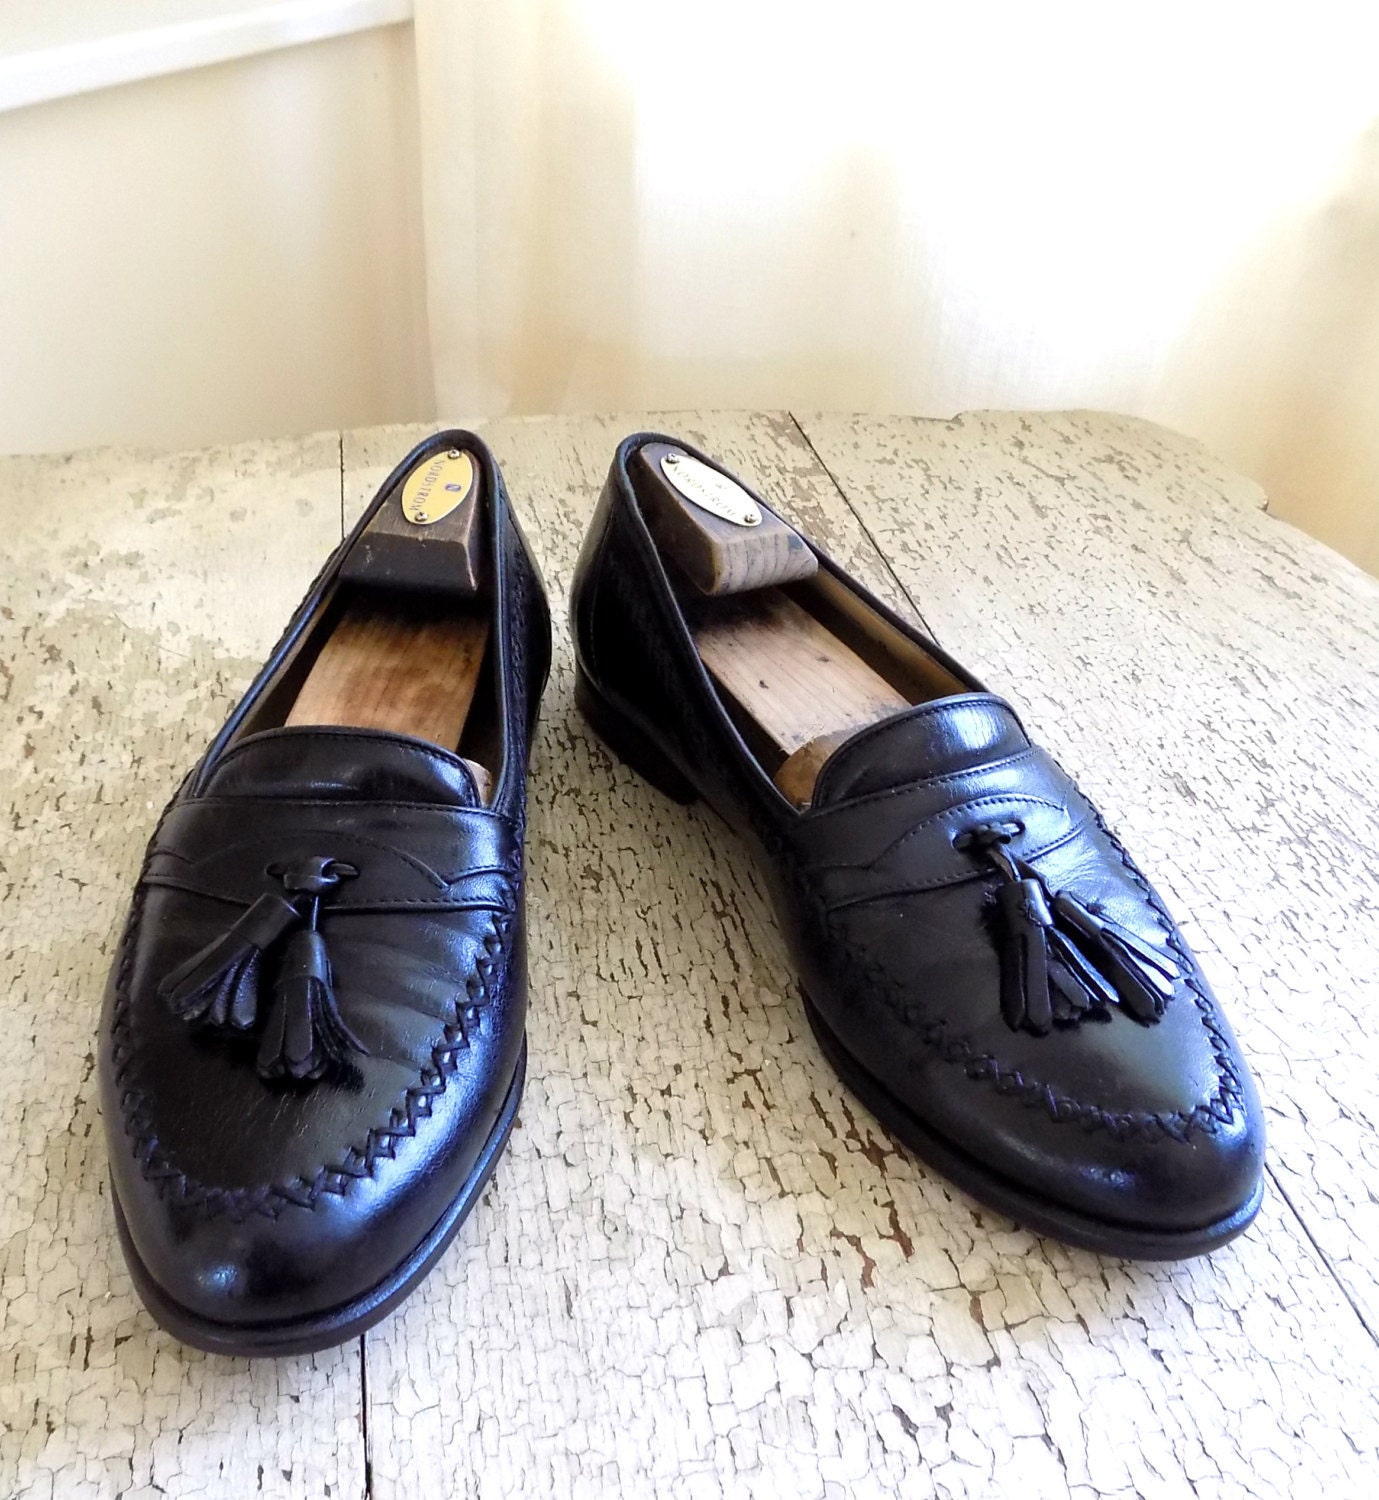 CLEARANCE 8.5 D Bally Men's Loafers CLASSY Shoes ITALY